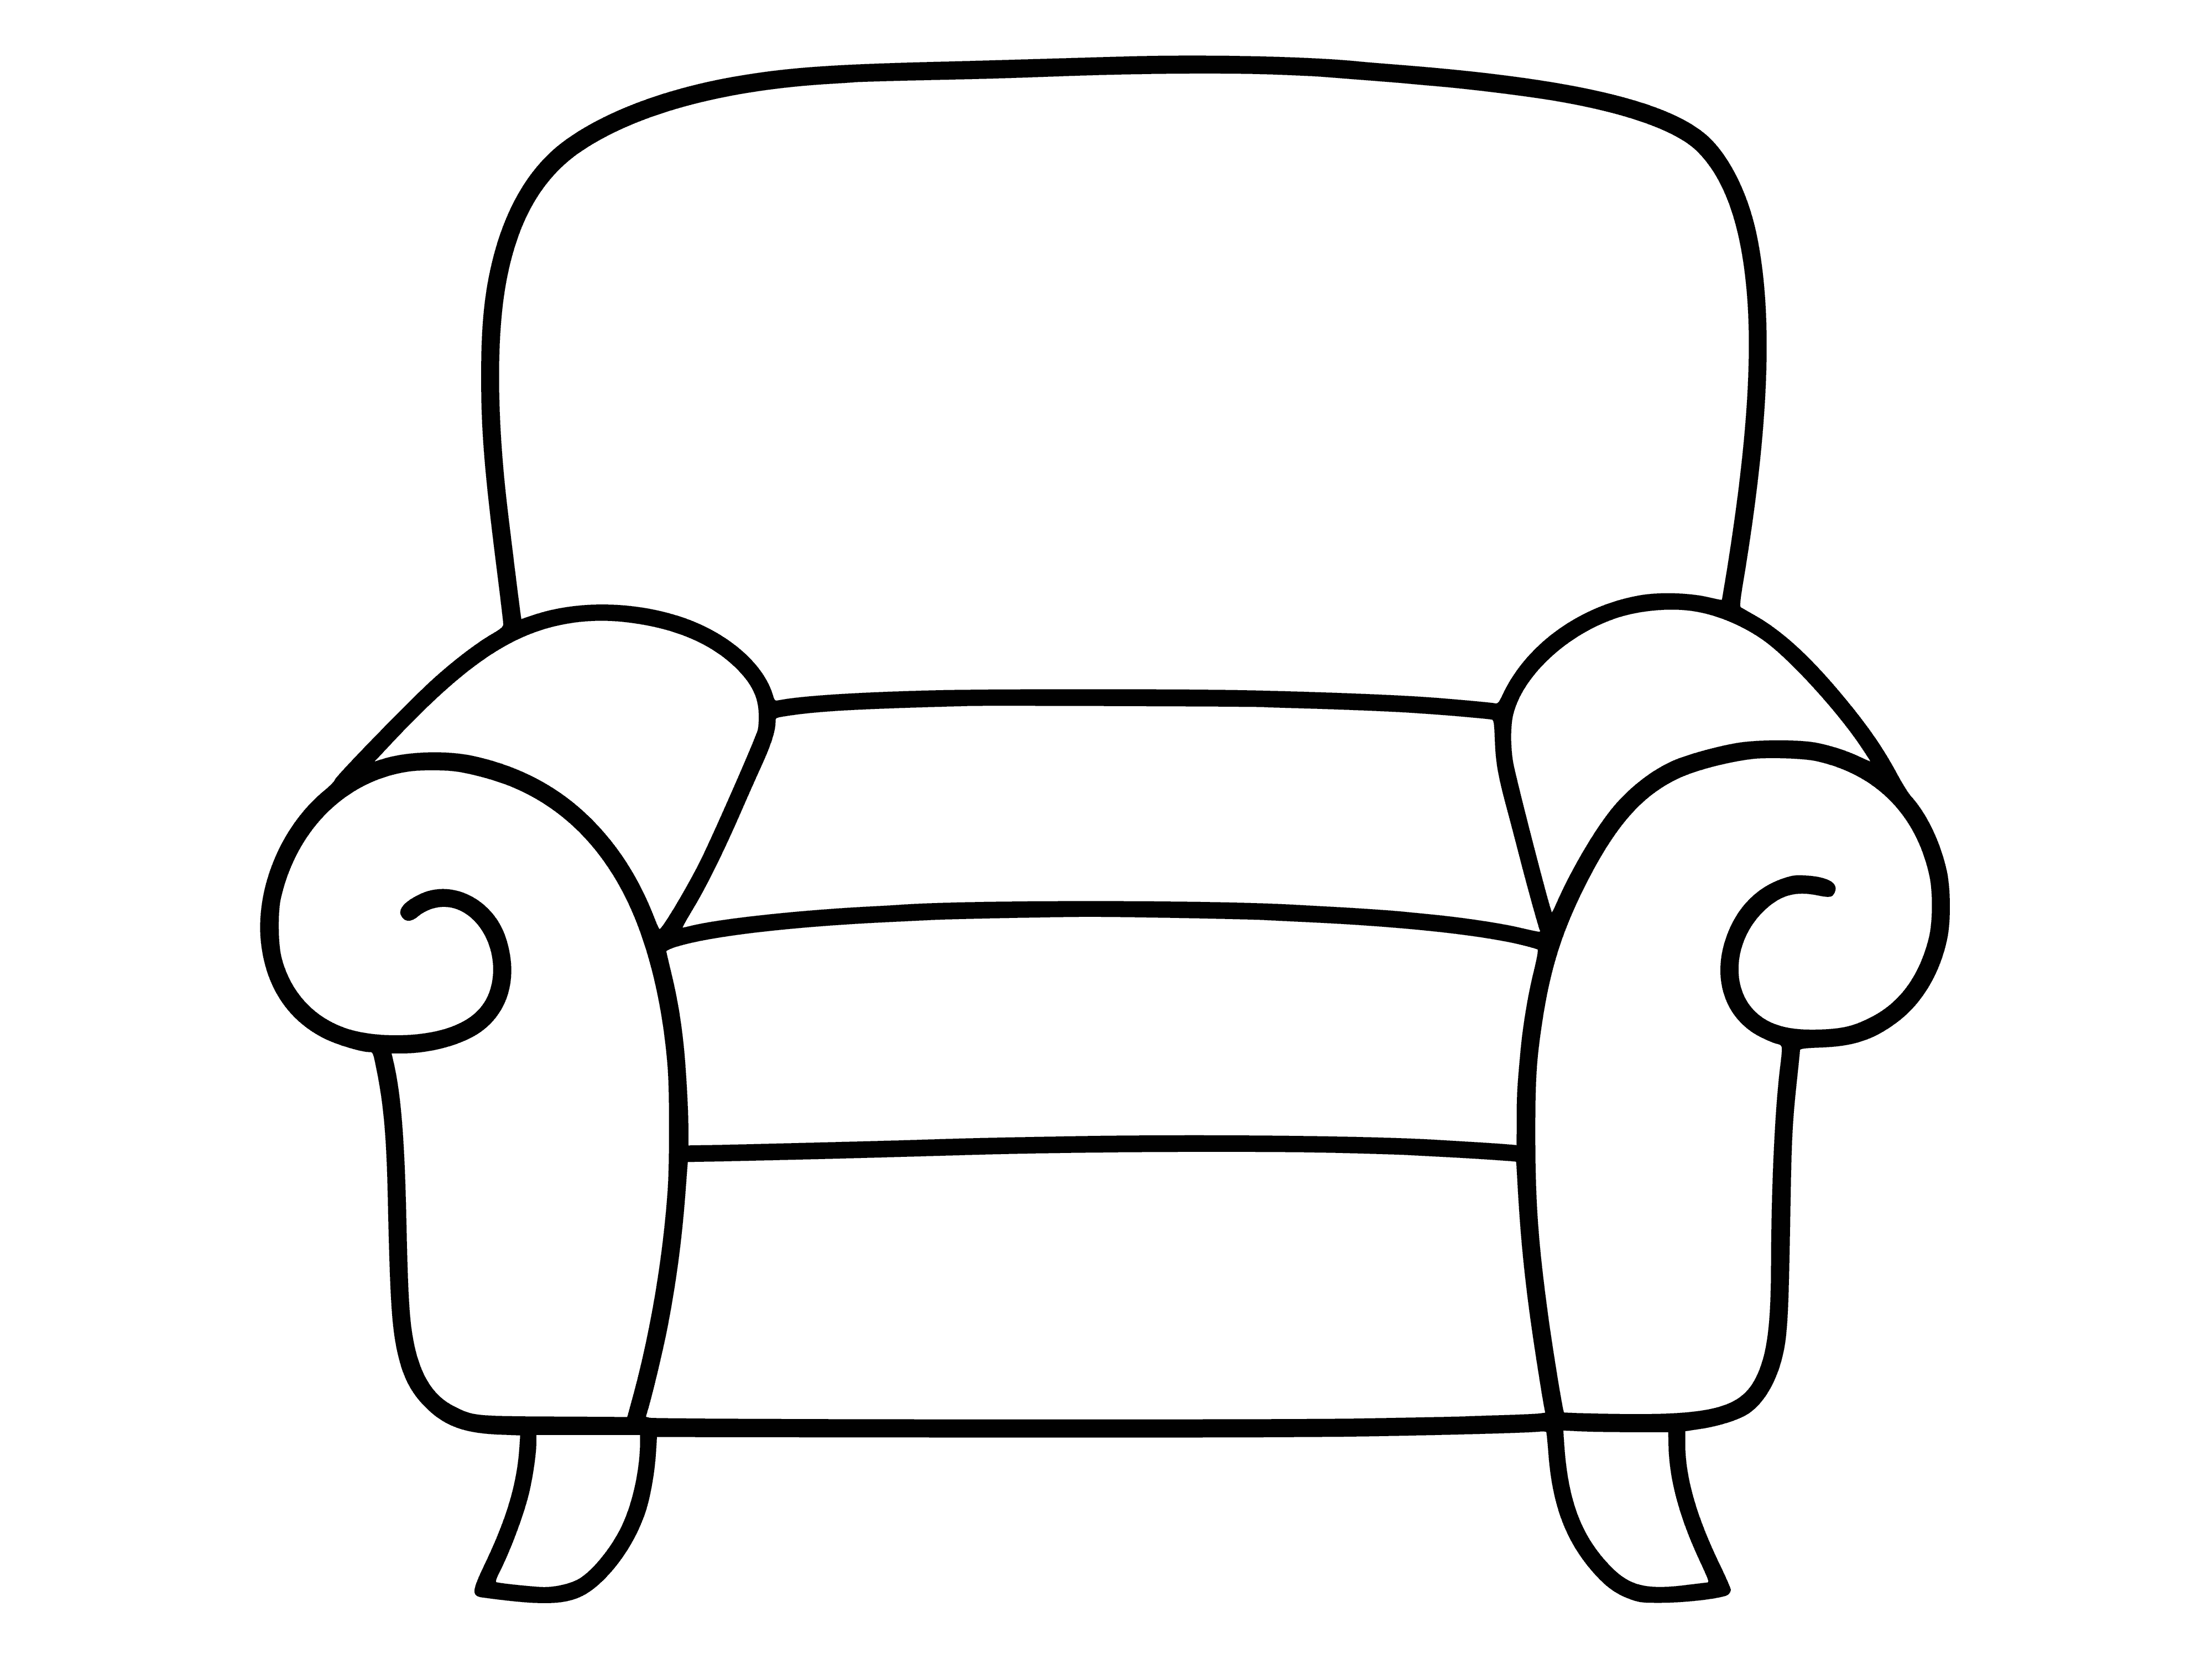 coloring page: Comfy armchair w/ high back, wood frame, dark green upholstery & 4 caster wheel legs. Matching pillow included.